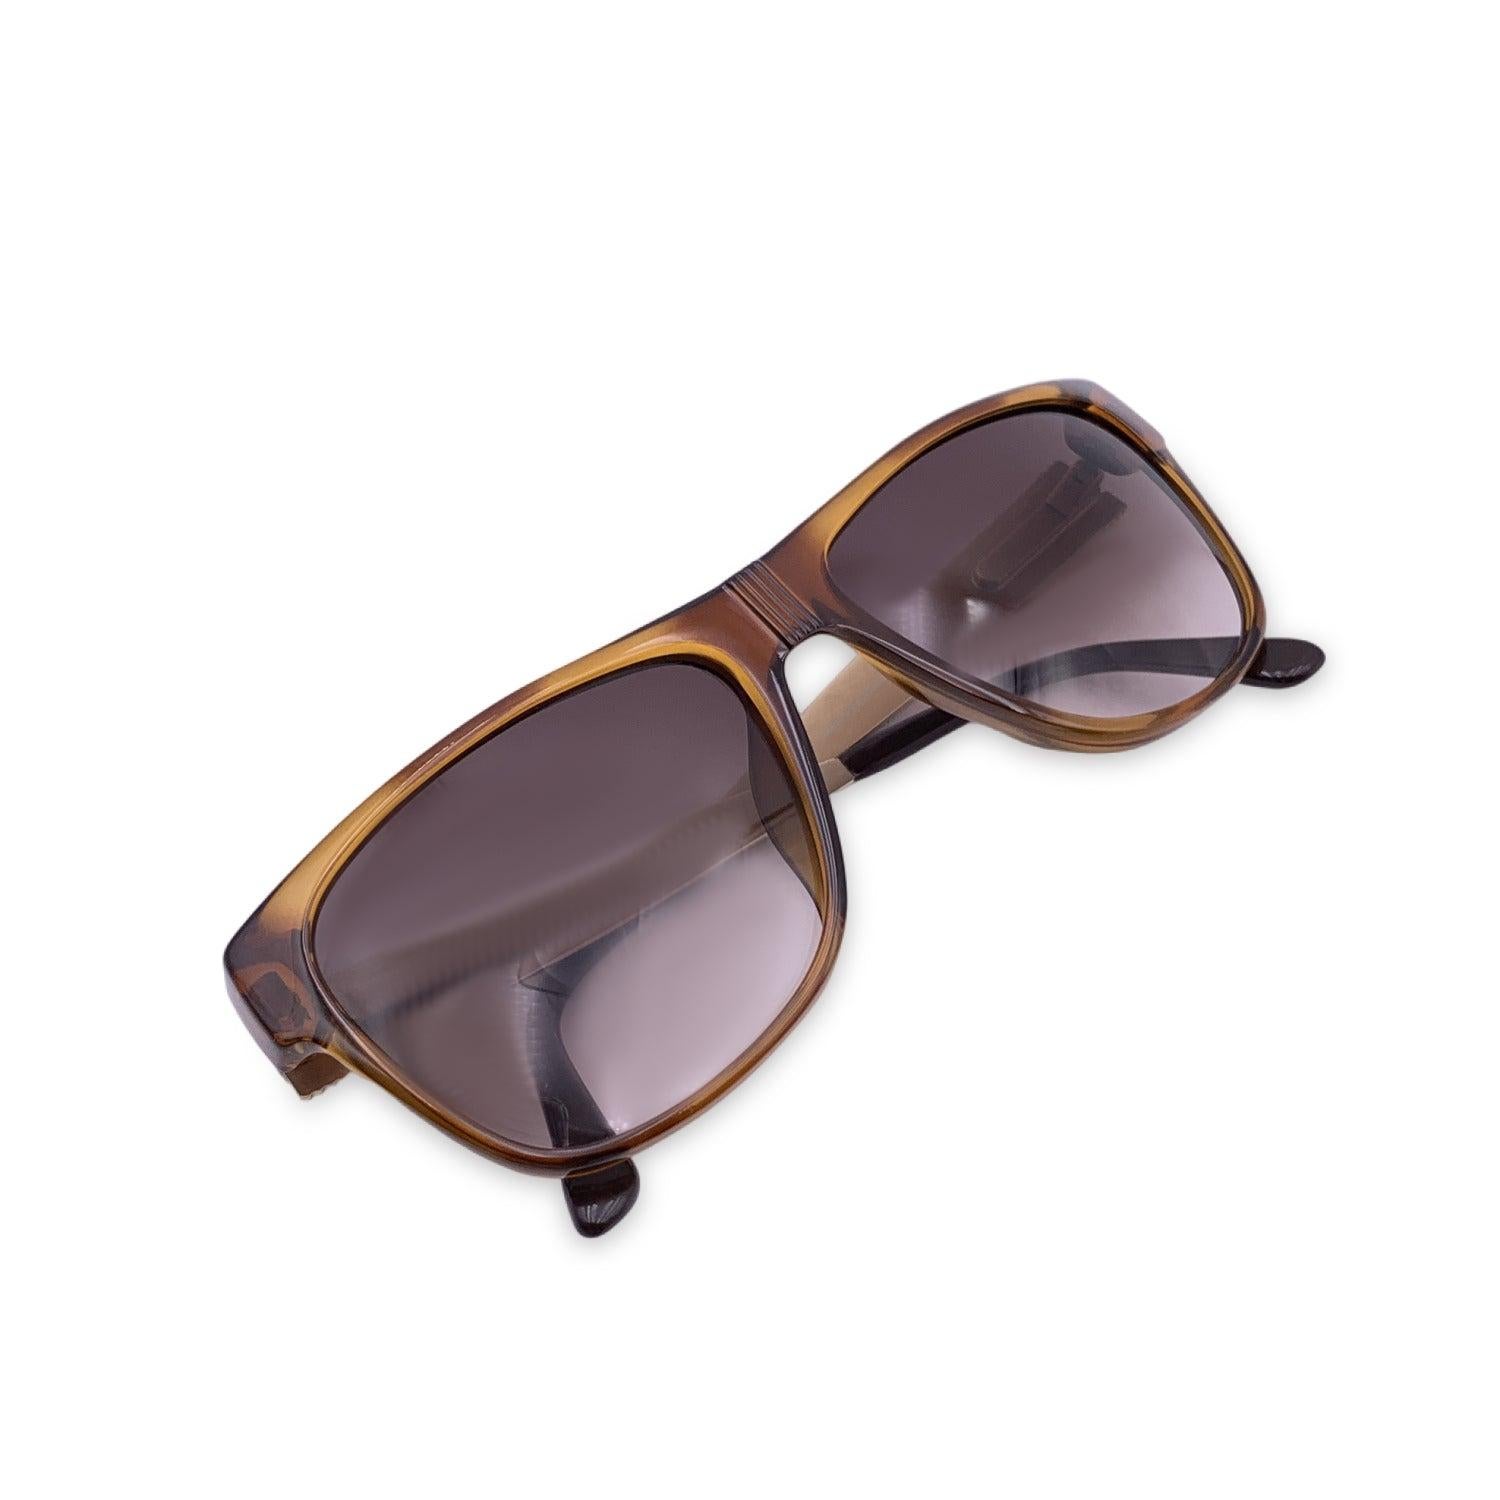 Vintage Christian Dior Monsieur Sunglasses, Mod. 2406 11 Optyl. Size: 57/16 140mm. Brown acetate frame, with gold metal finish on the sides. CD logo con temples . 100% Total UVA/UVB protection. Brown gradient lenses. Condition A+ - MINT Never Worn,